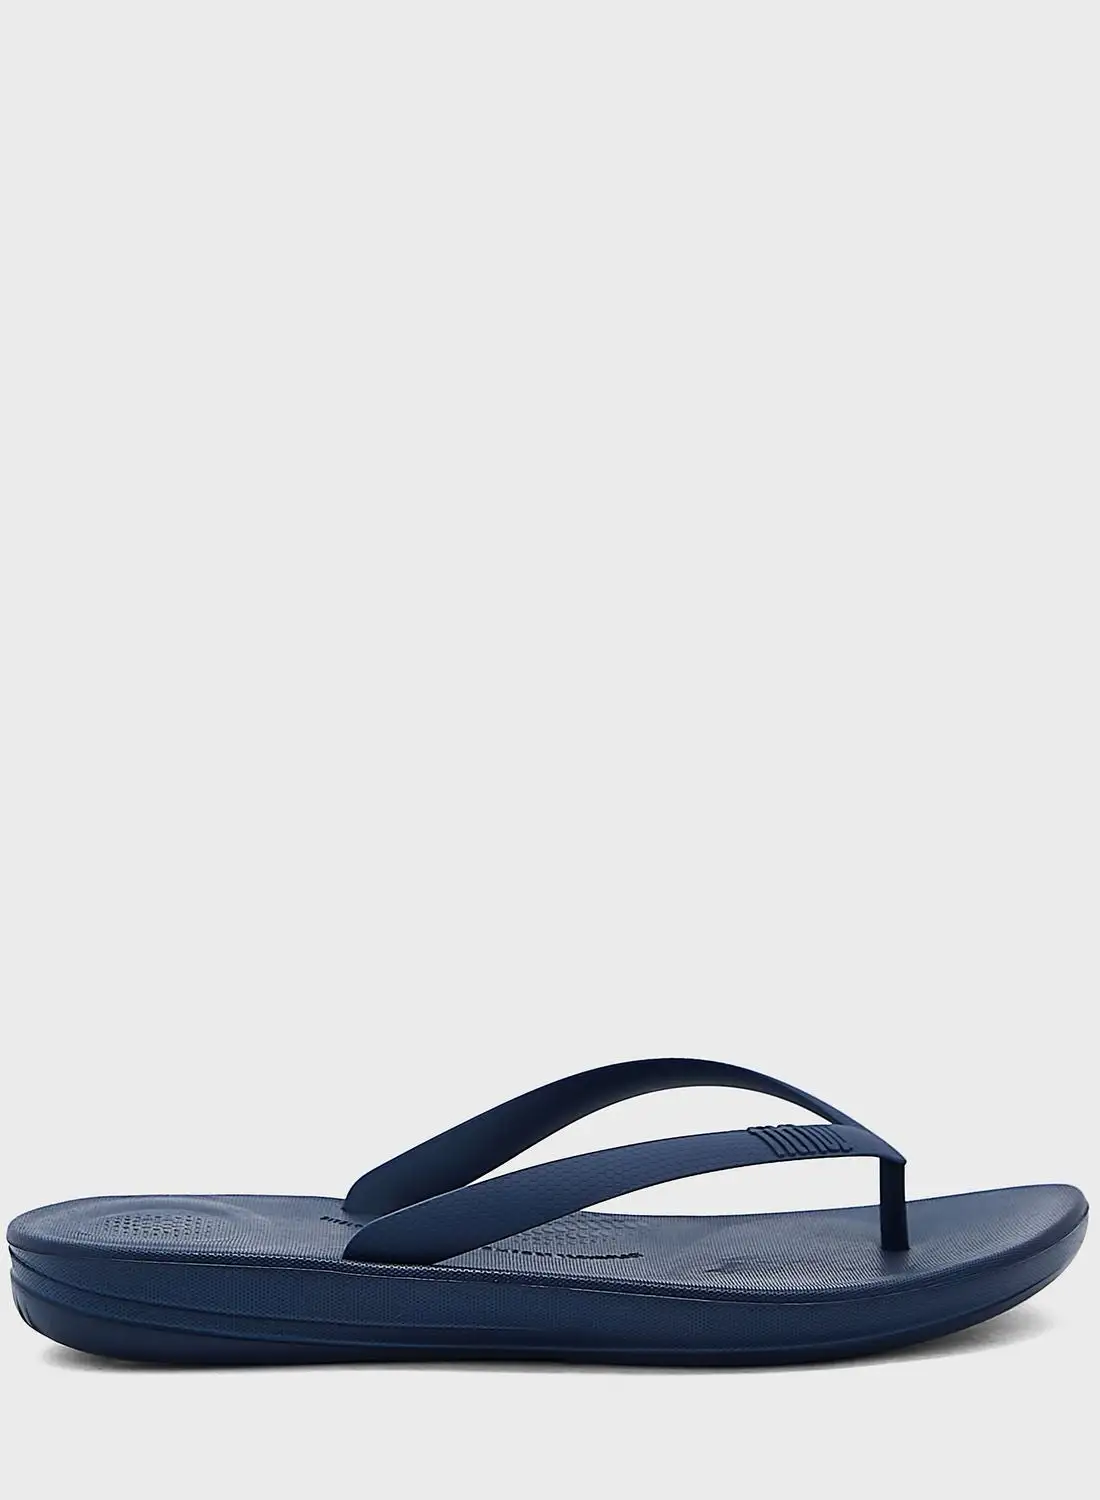 fitflop Casual Flip Flop